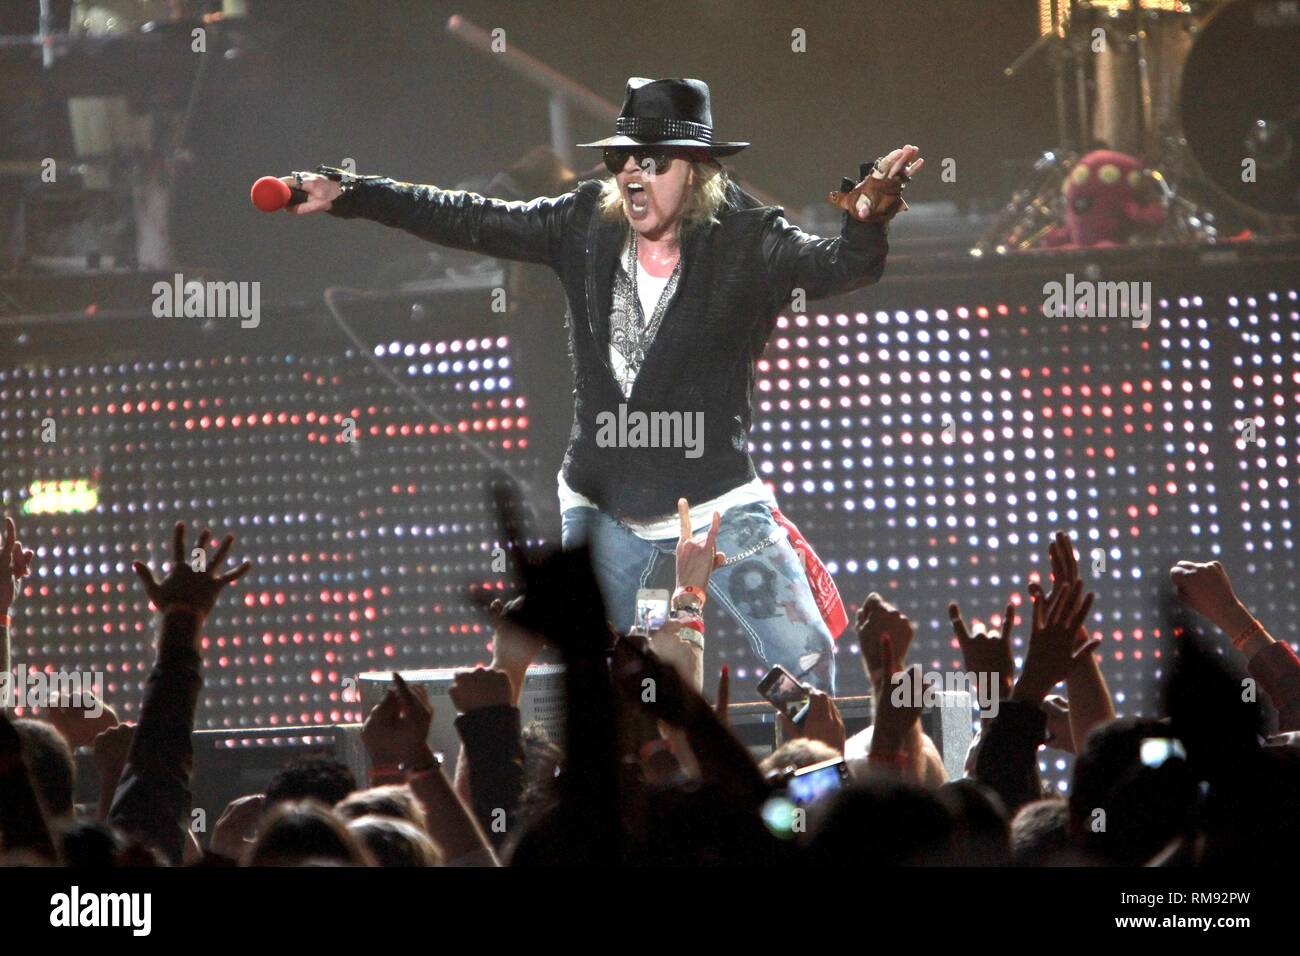 Singer Axl Rose is shown performing on stage during a during a "live"  concert appearance with Guns N' Roses Stock Photo - Alamy